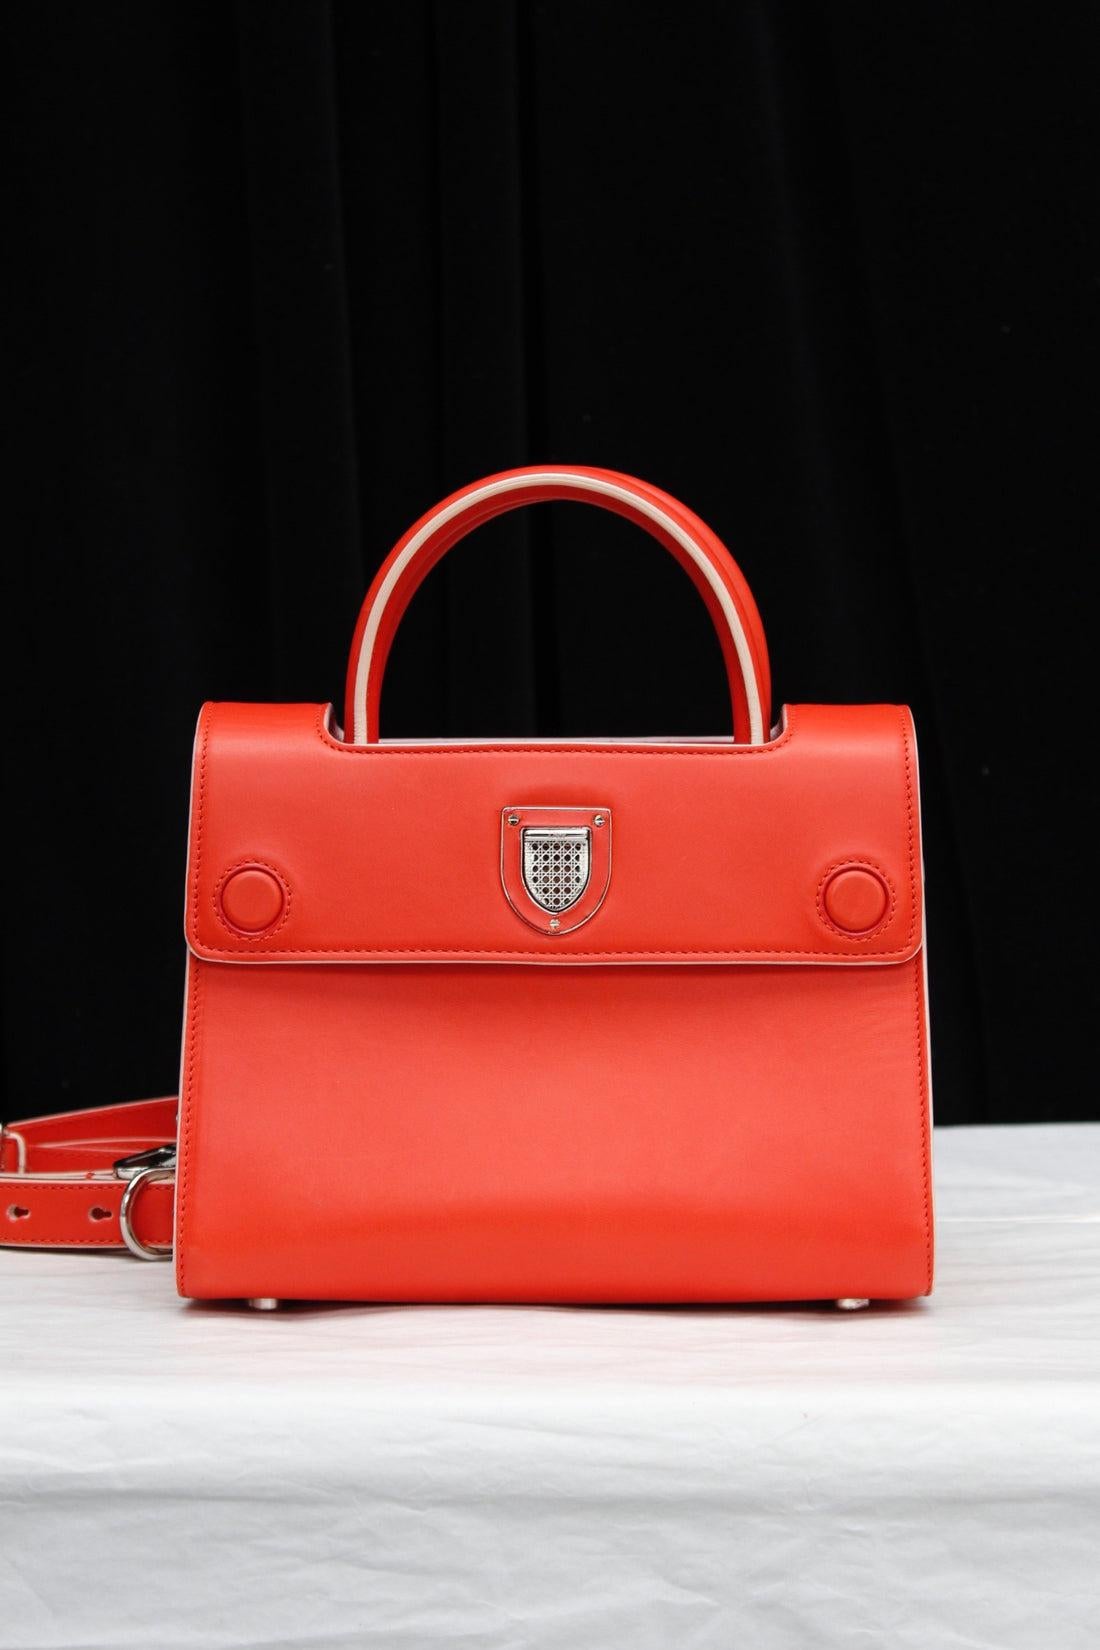 Dior -Modern bag in orange and white leather.

Additional information: 

Dimensions: 
Length: 21 cm (8.26